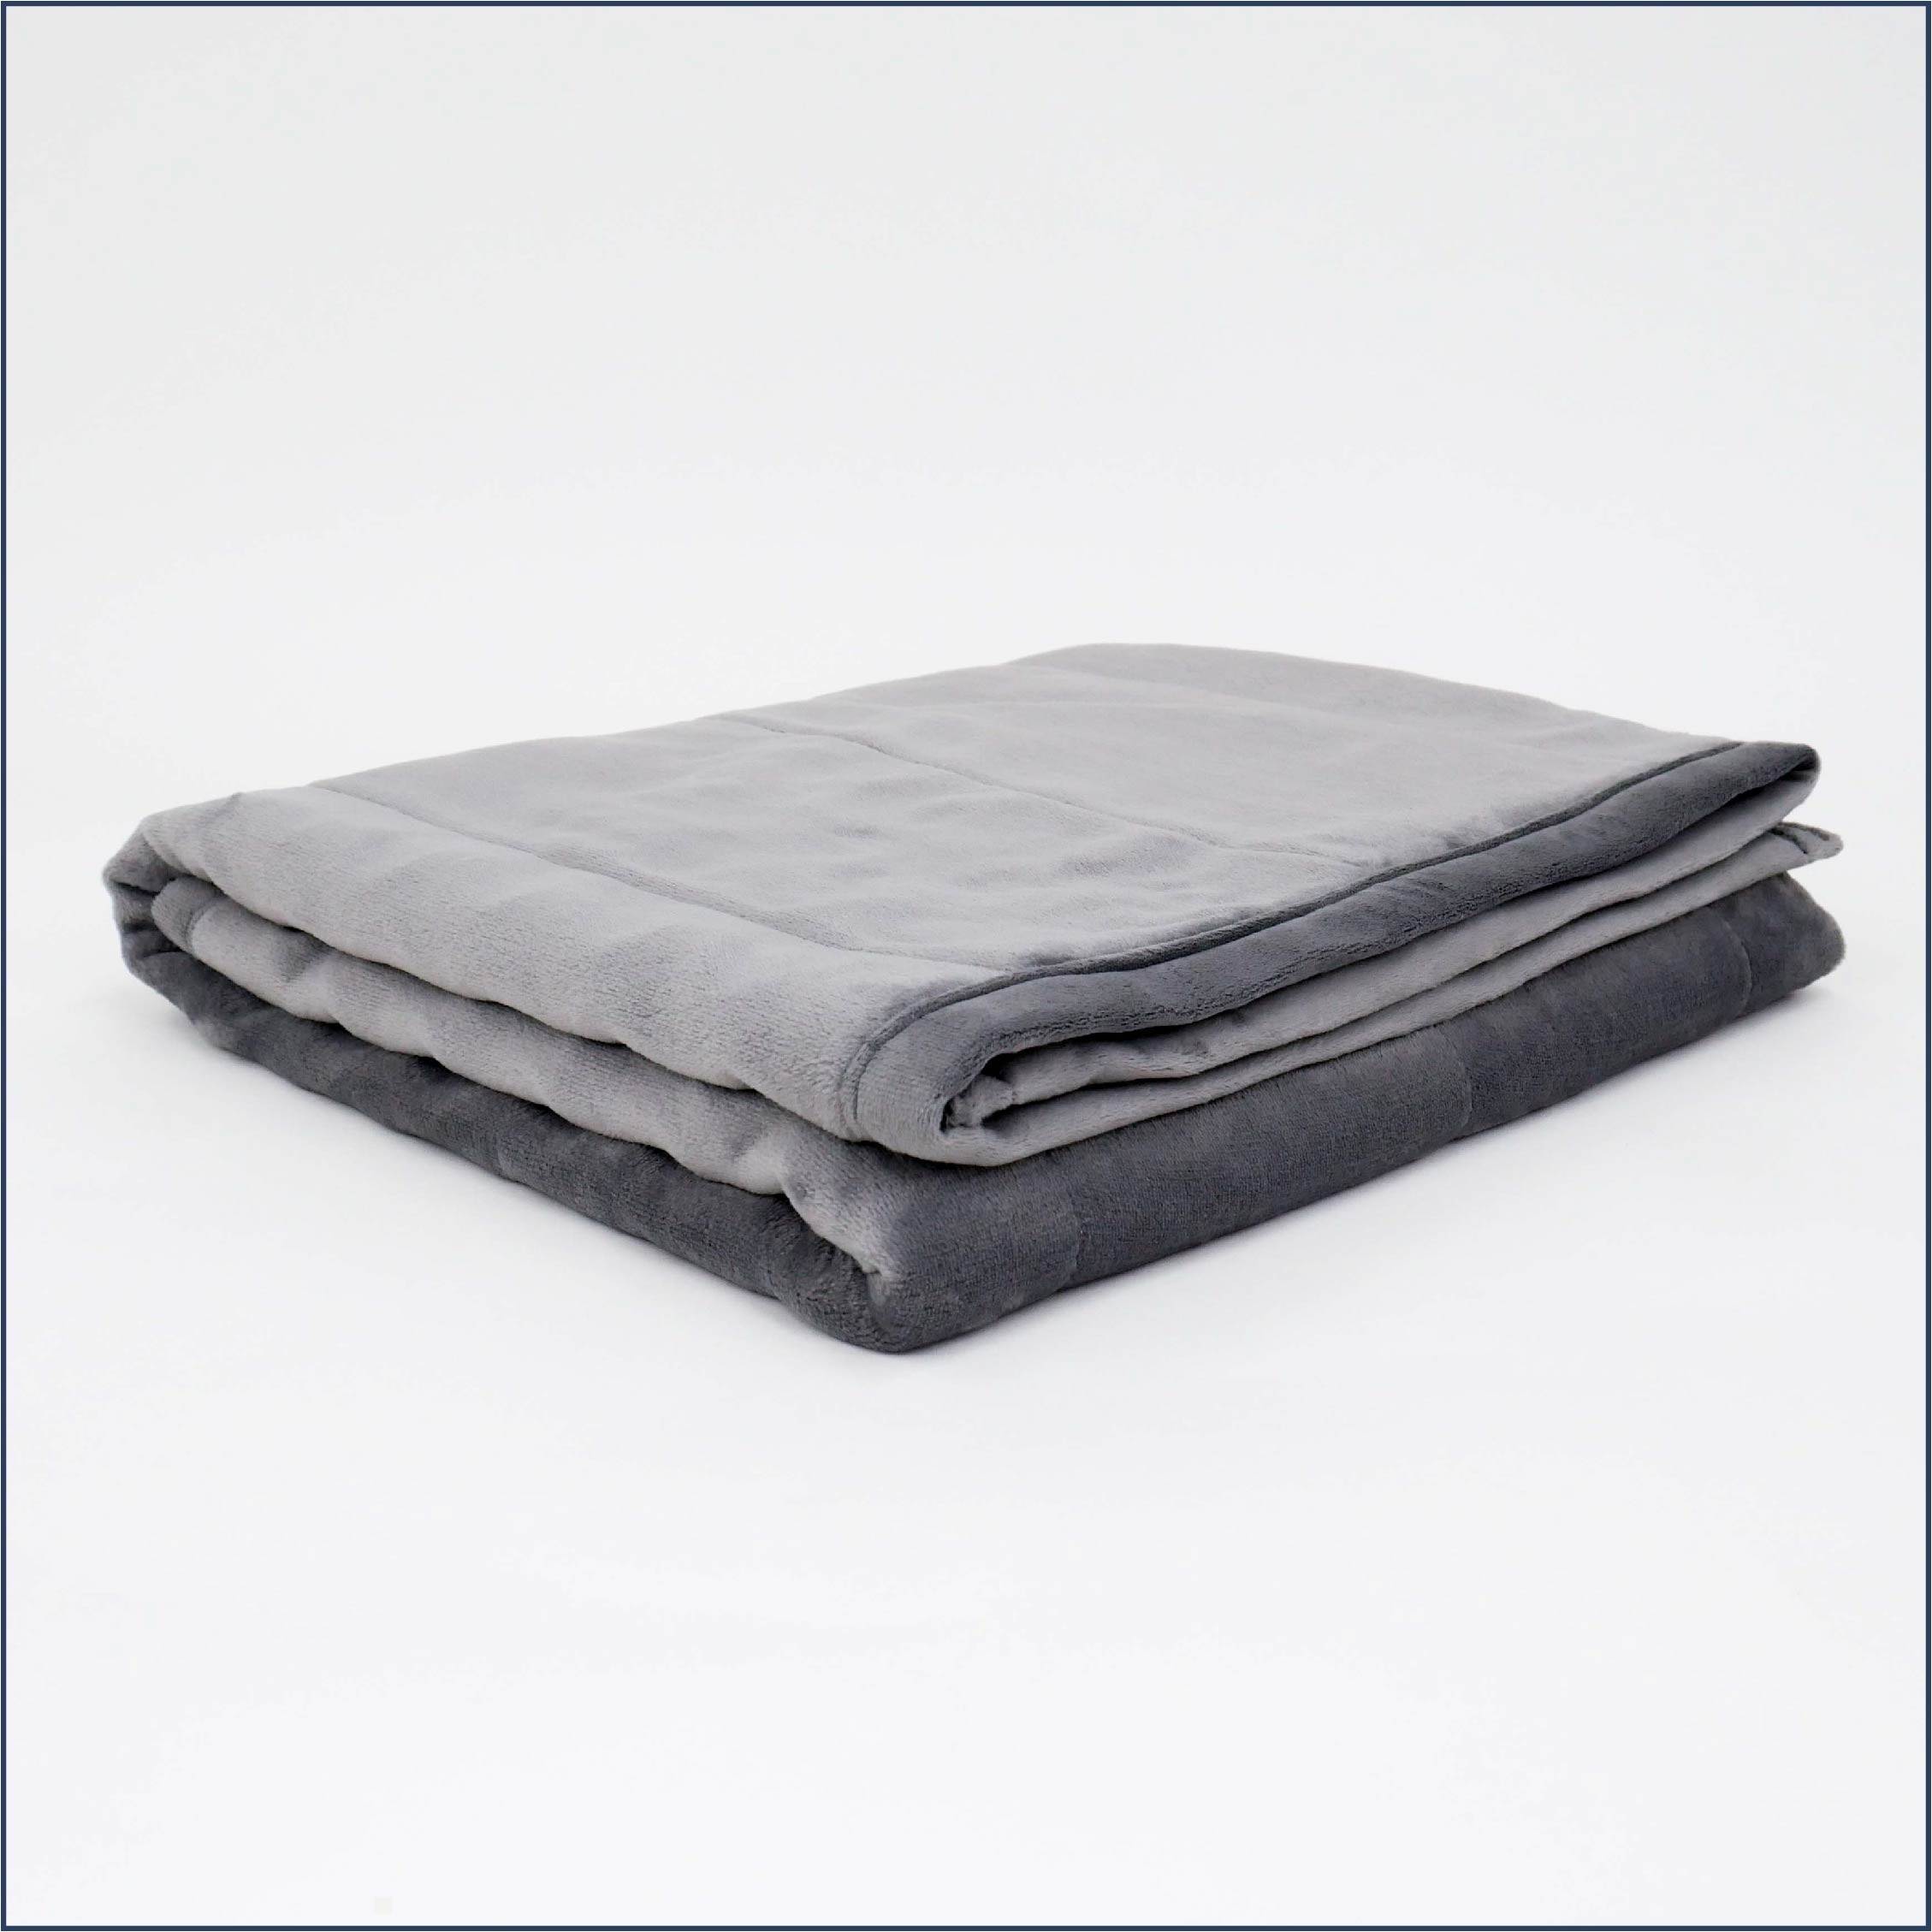 Tuc Kids Warm Weighted Blanket folded.